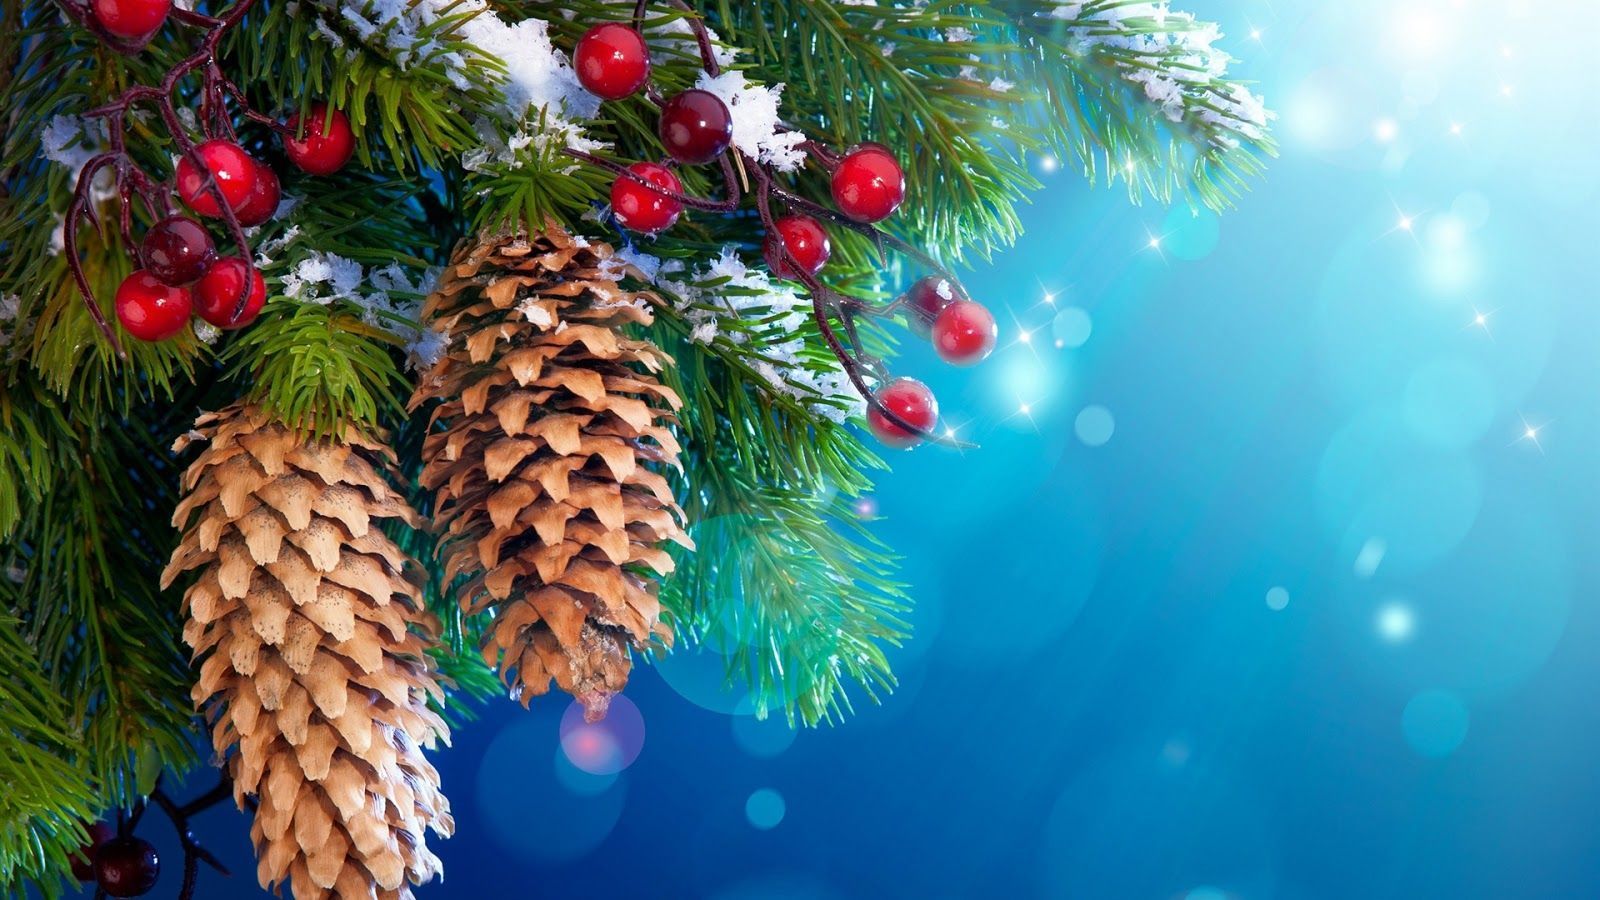 HD Wallpaper Pic Blog is the best blog for downloading free New year decoration high resolution wallpa. Christmas tree decorations, Christmas, Christmas wallpaper